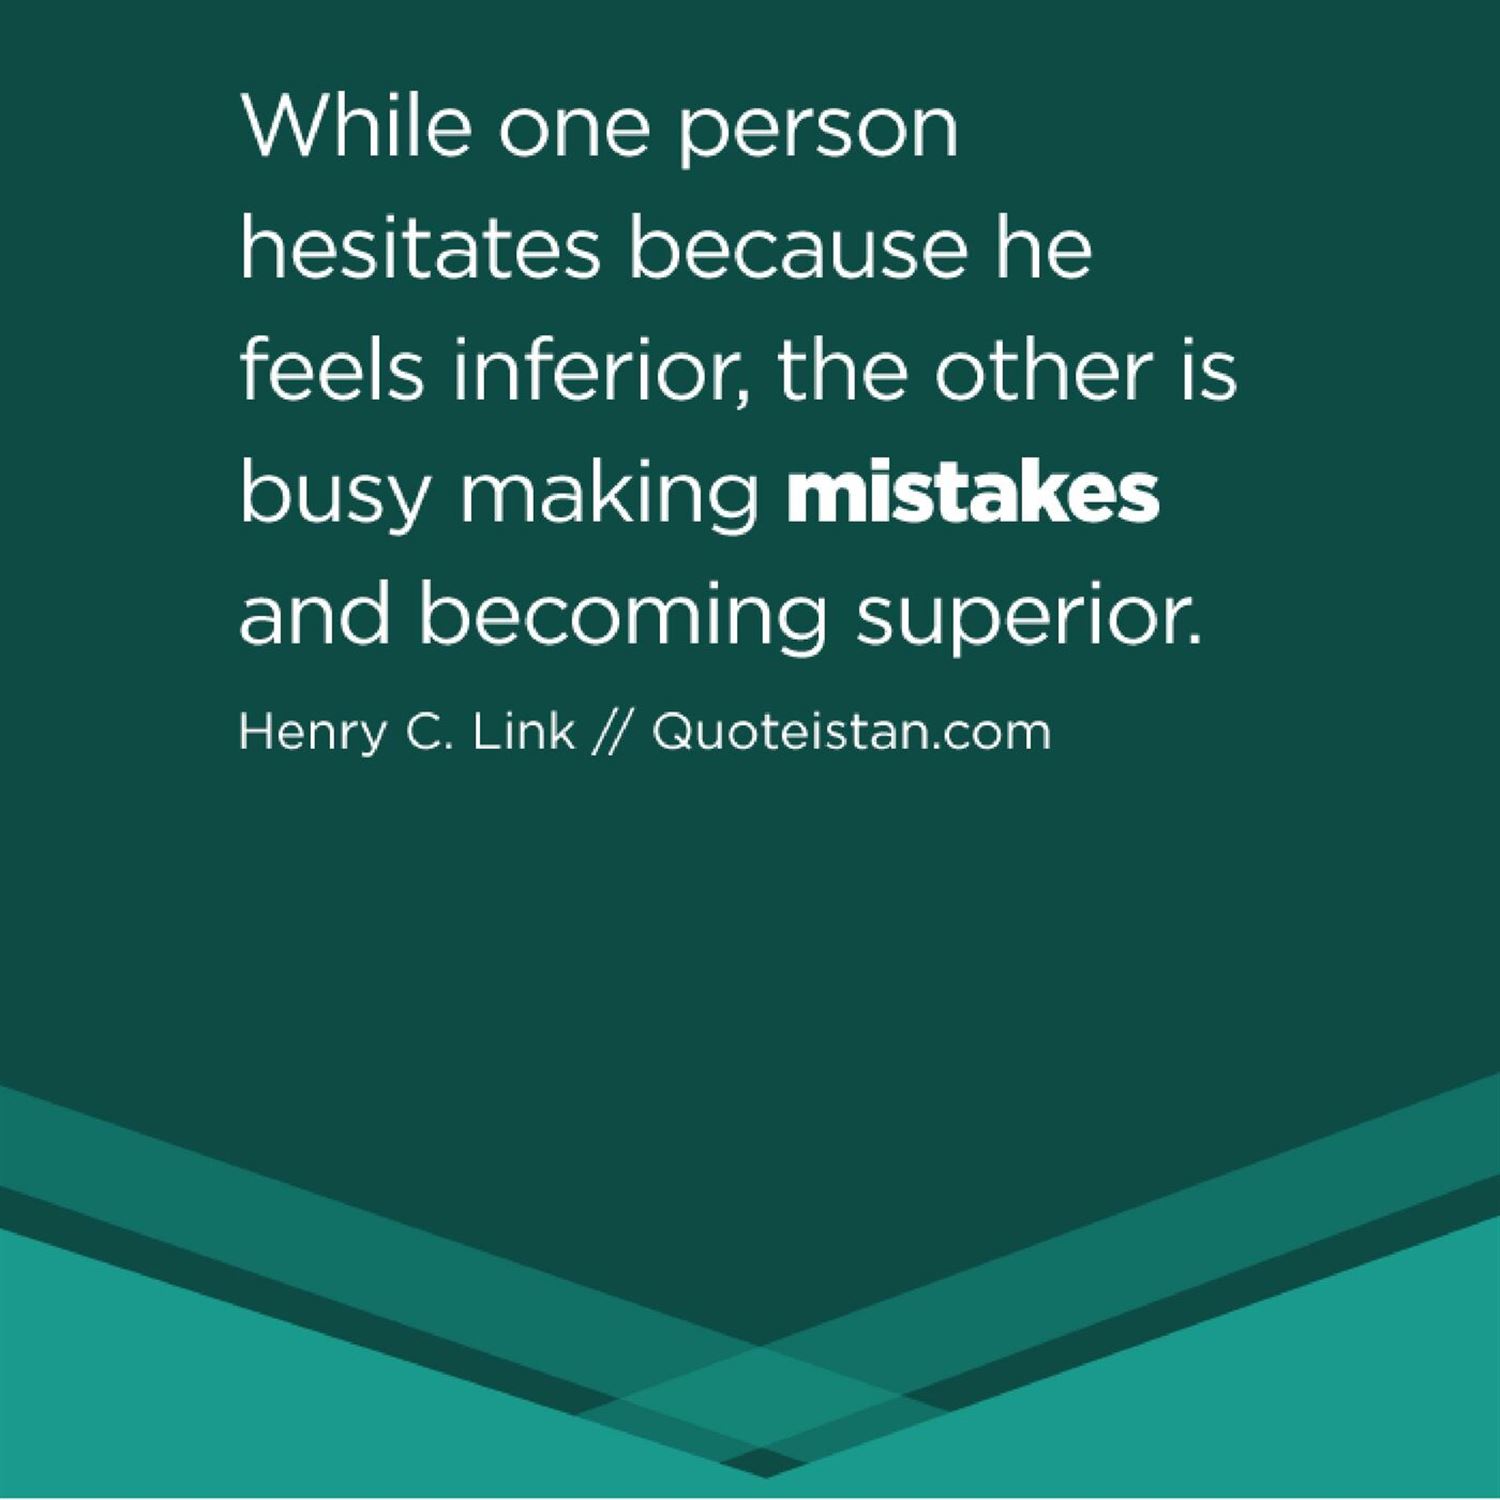 Should one seek out mistakes?